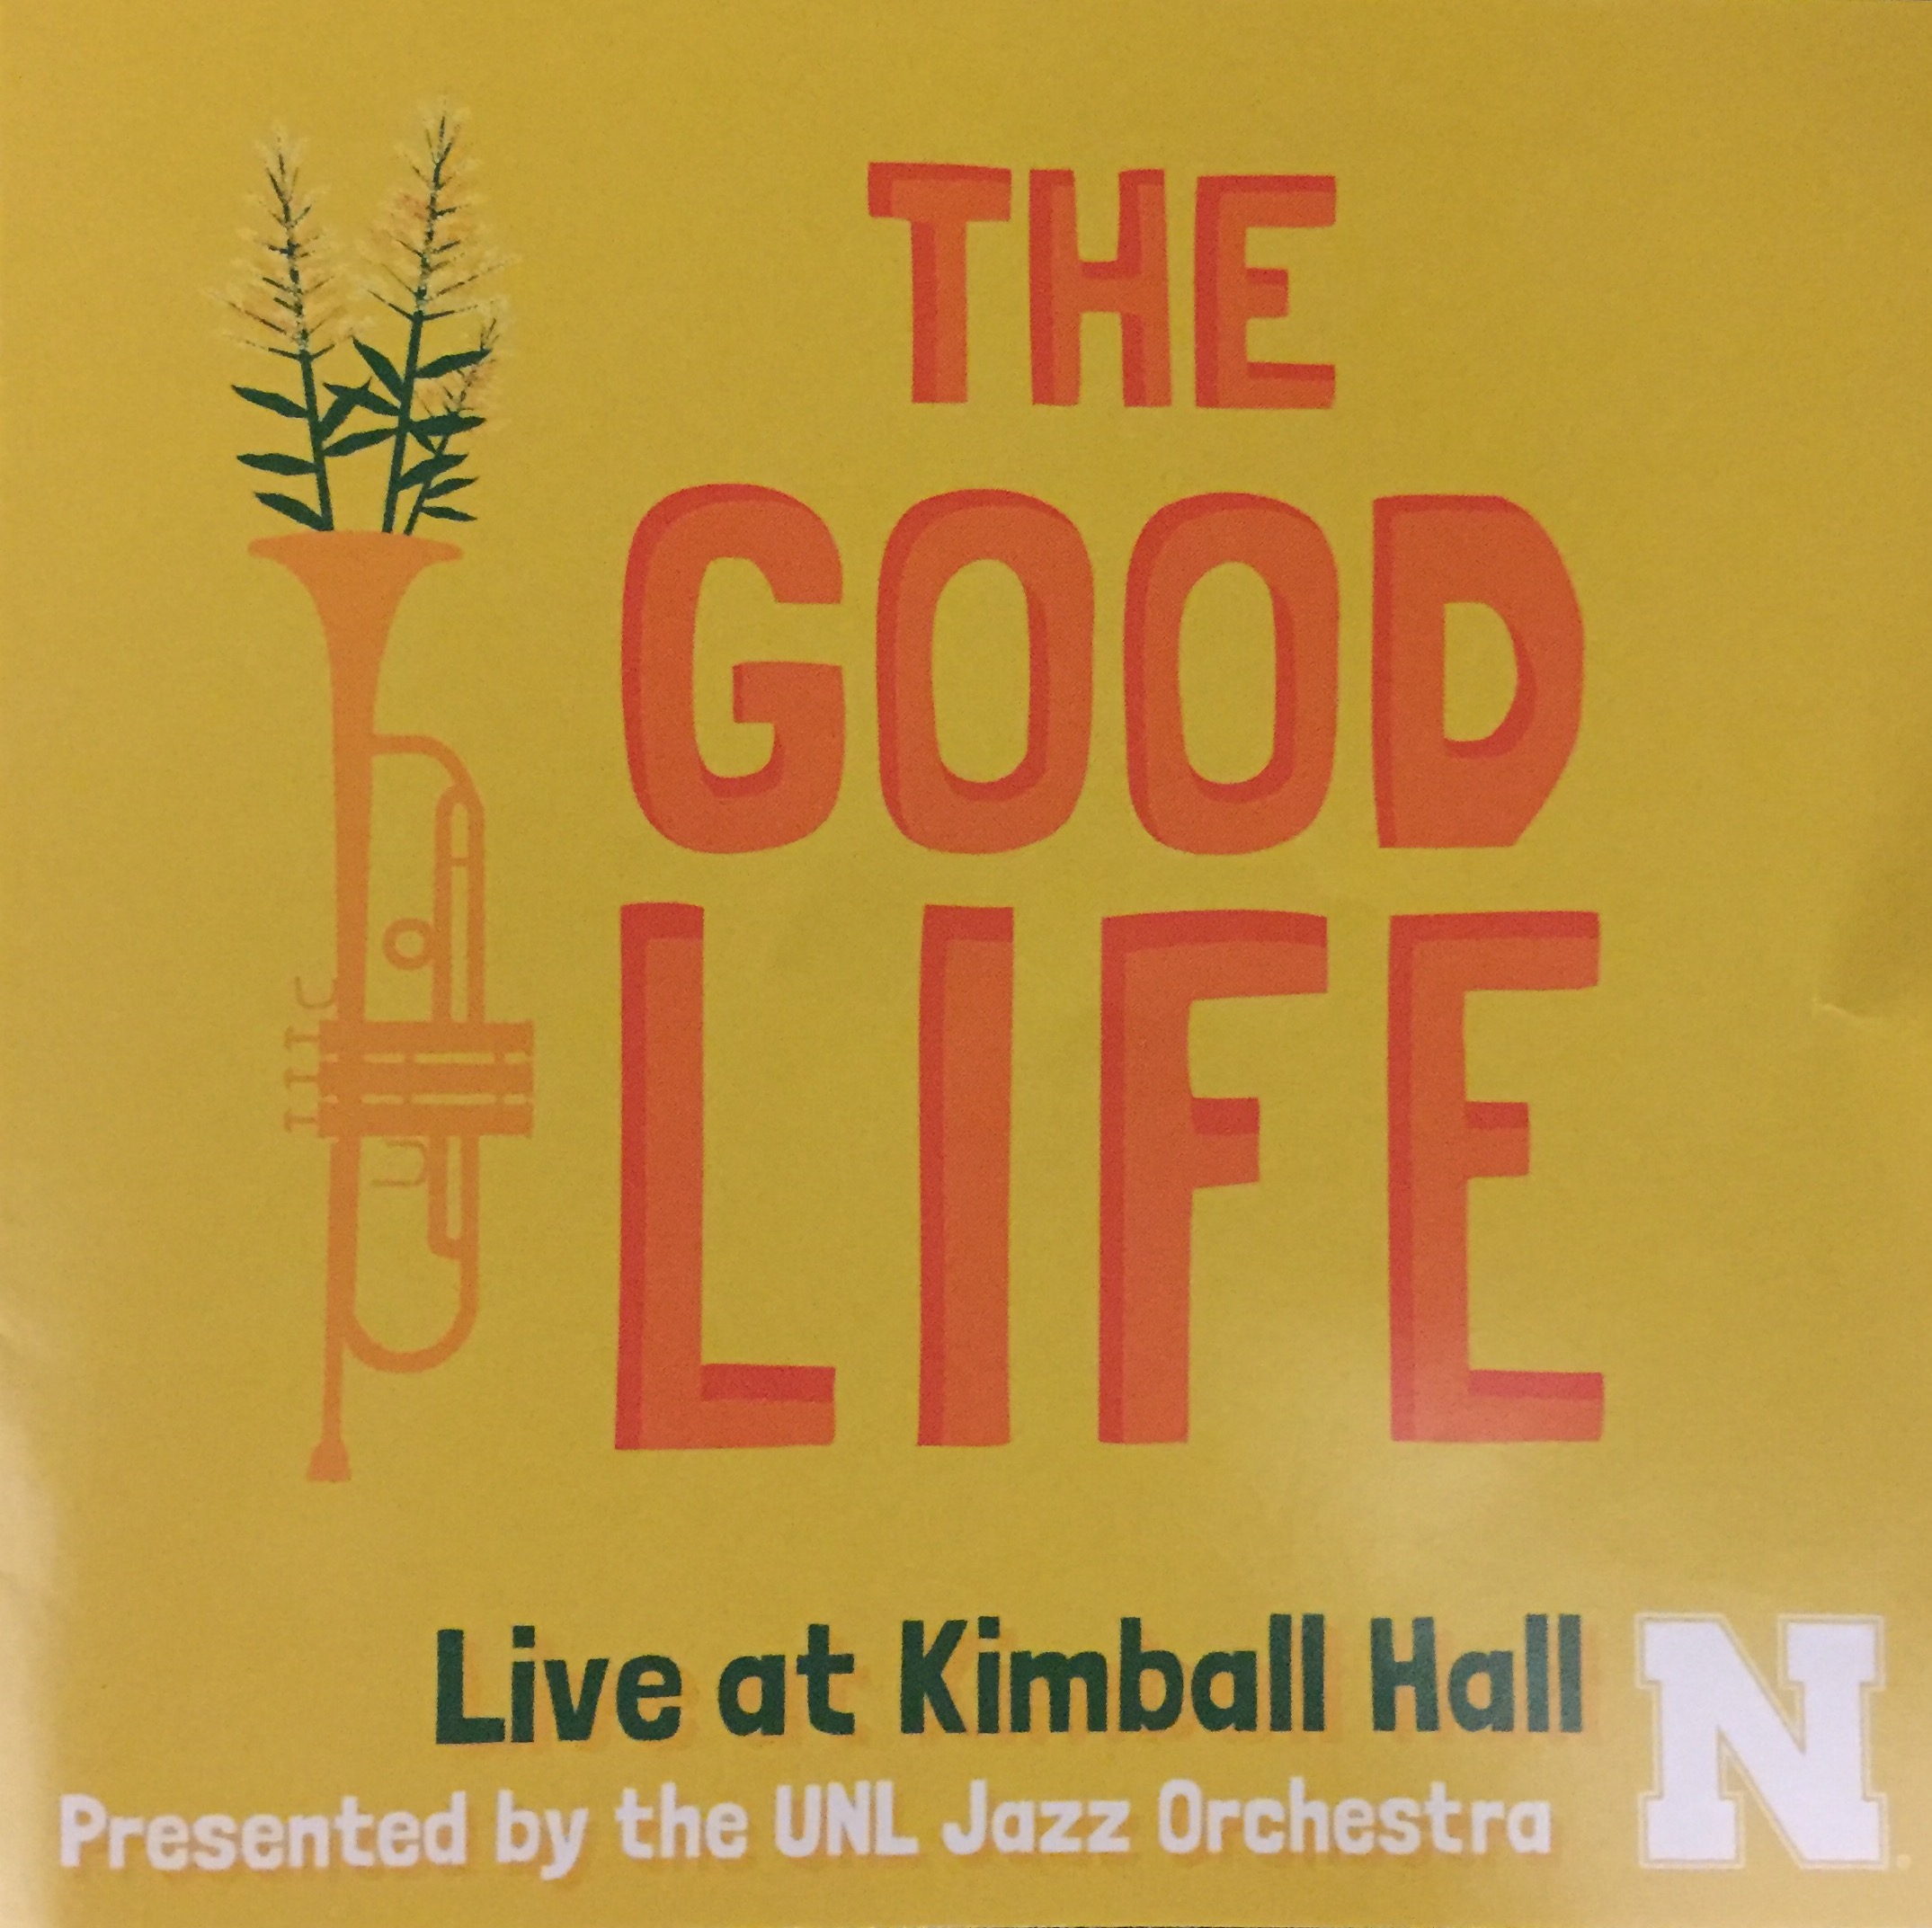 Cover for "The Good Life" CD.